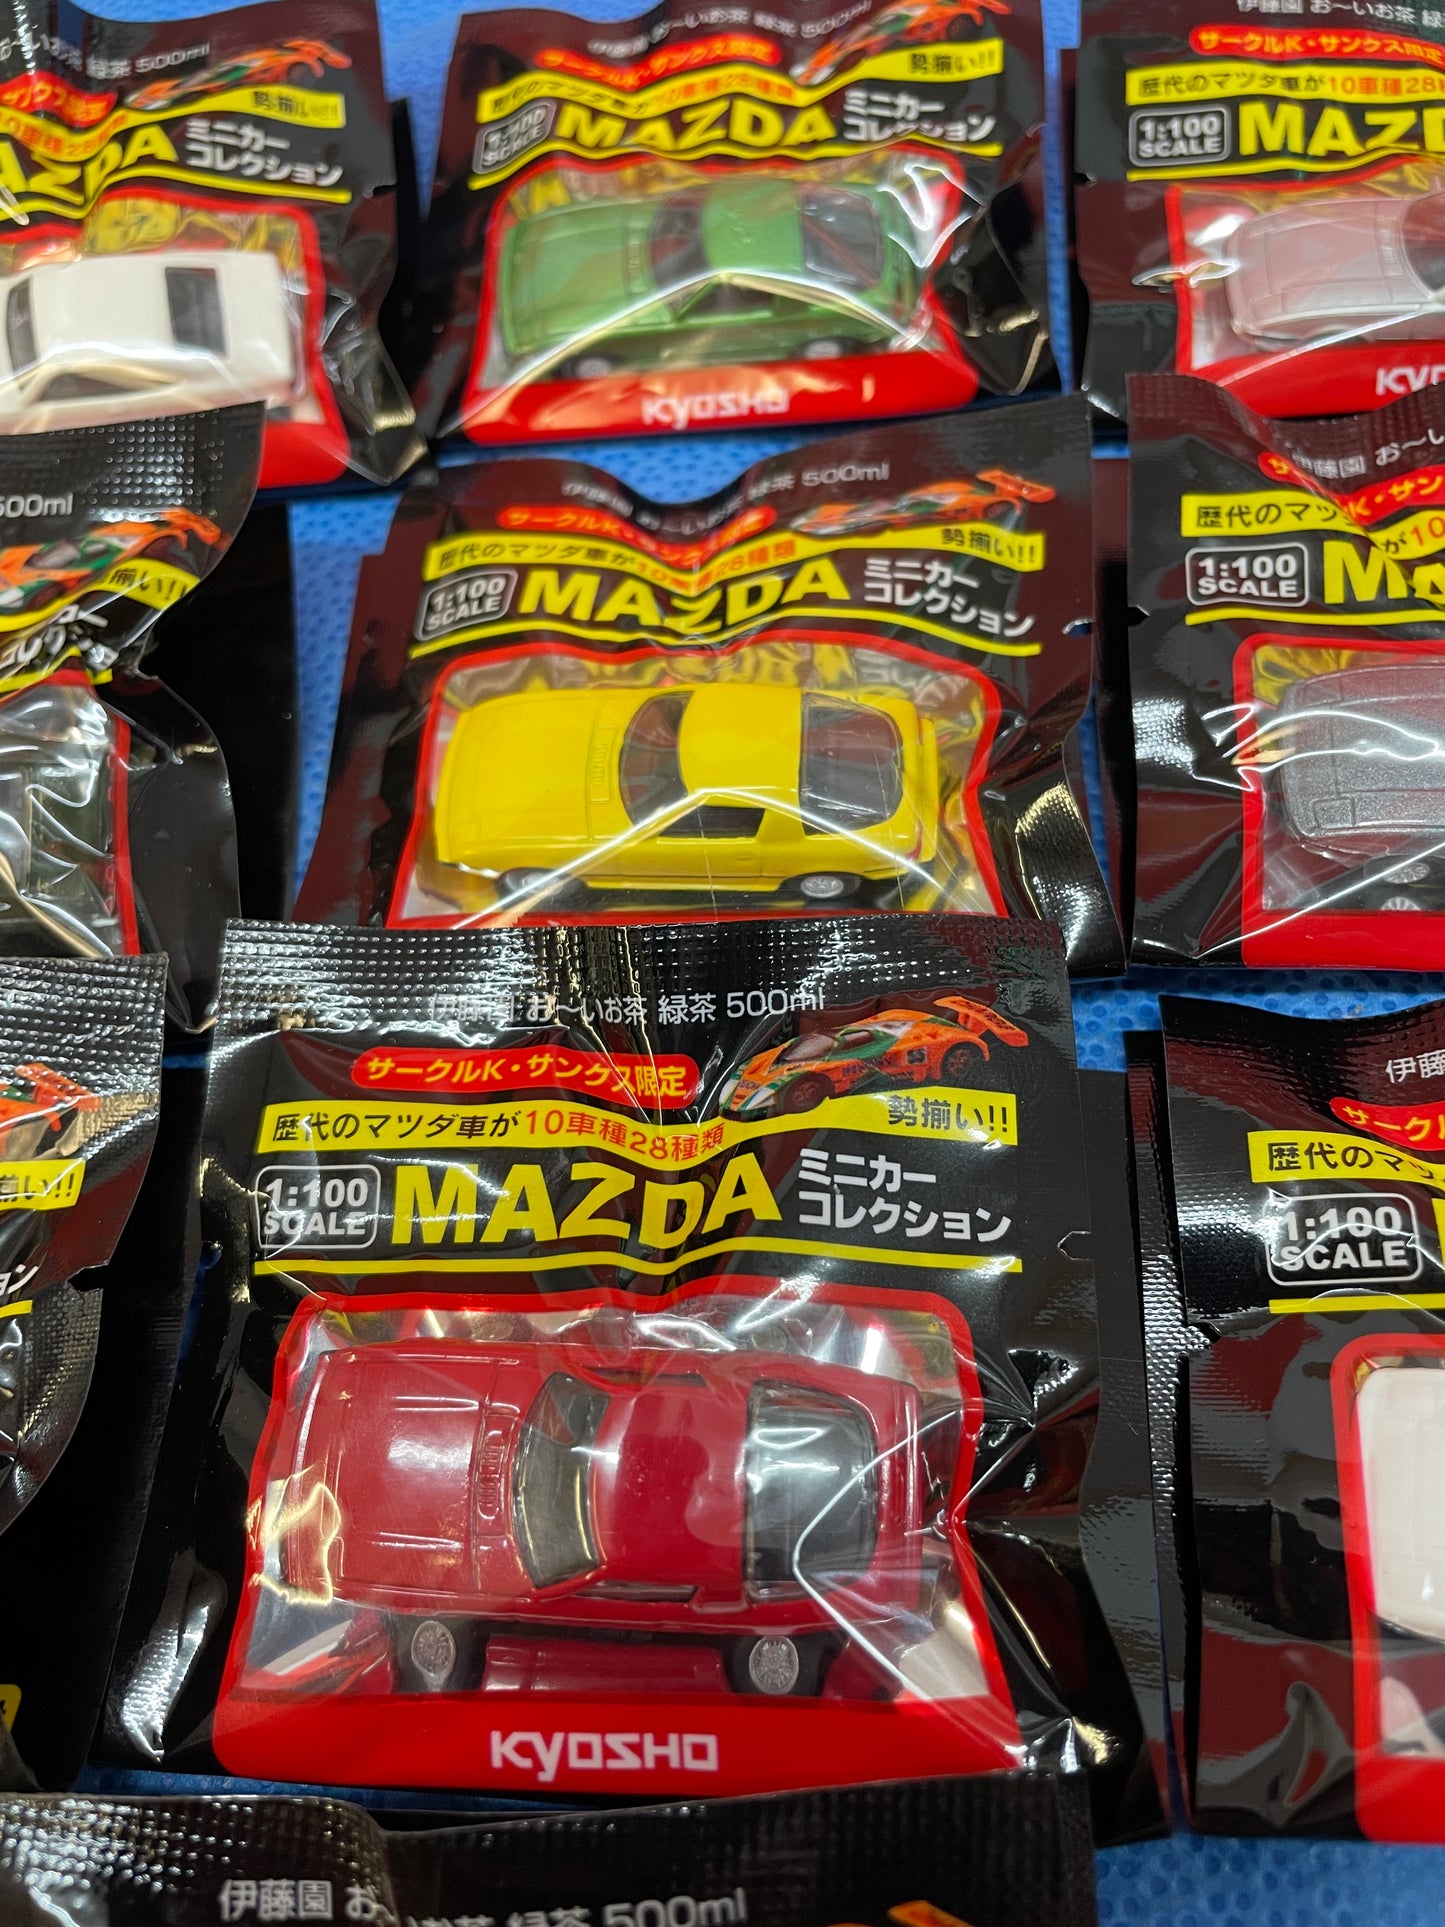 MAZDA Kyosho 1:100 Scale Diecast Model Car Complete set of 28 RX-8 RX-3 787B Mazda Rx7 FD3S FD - RX7Parts